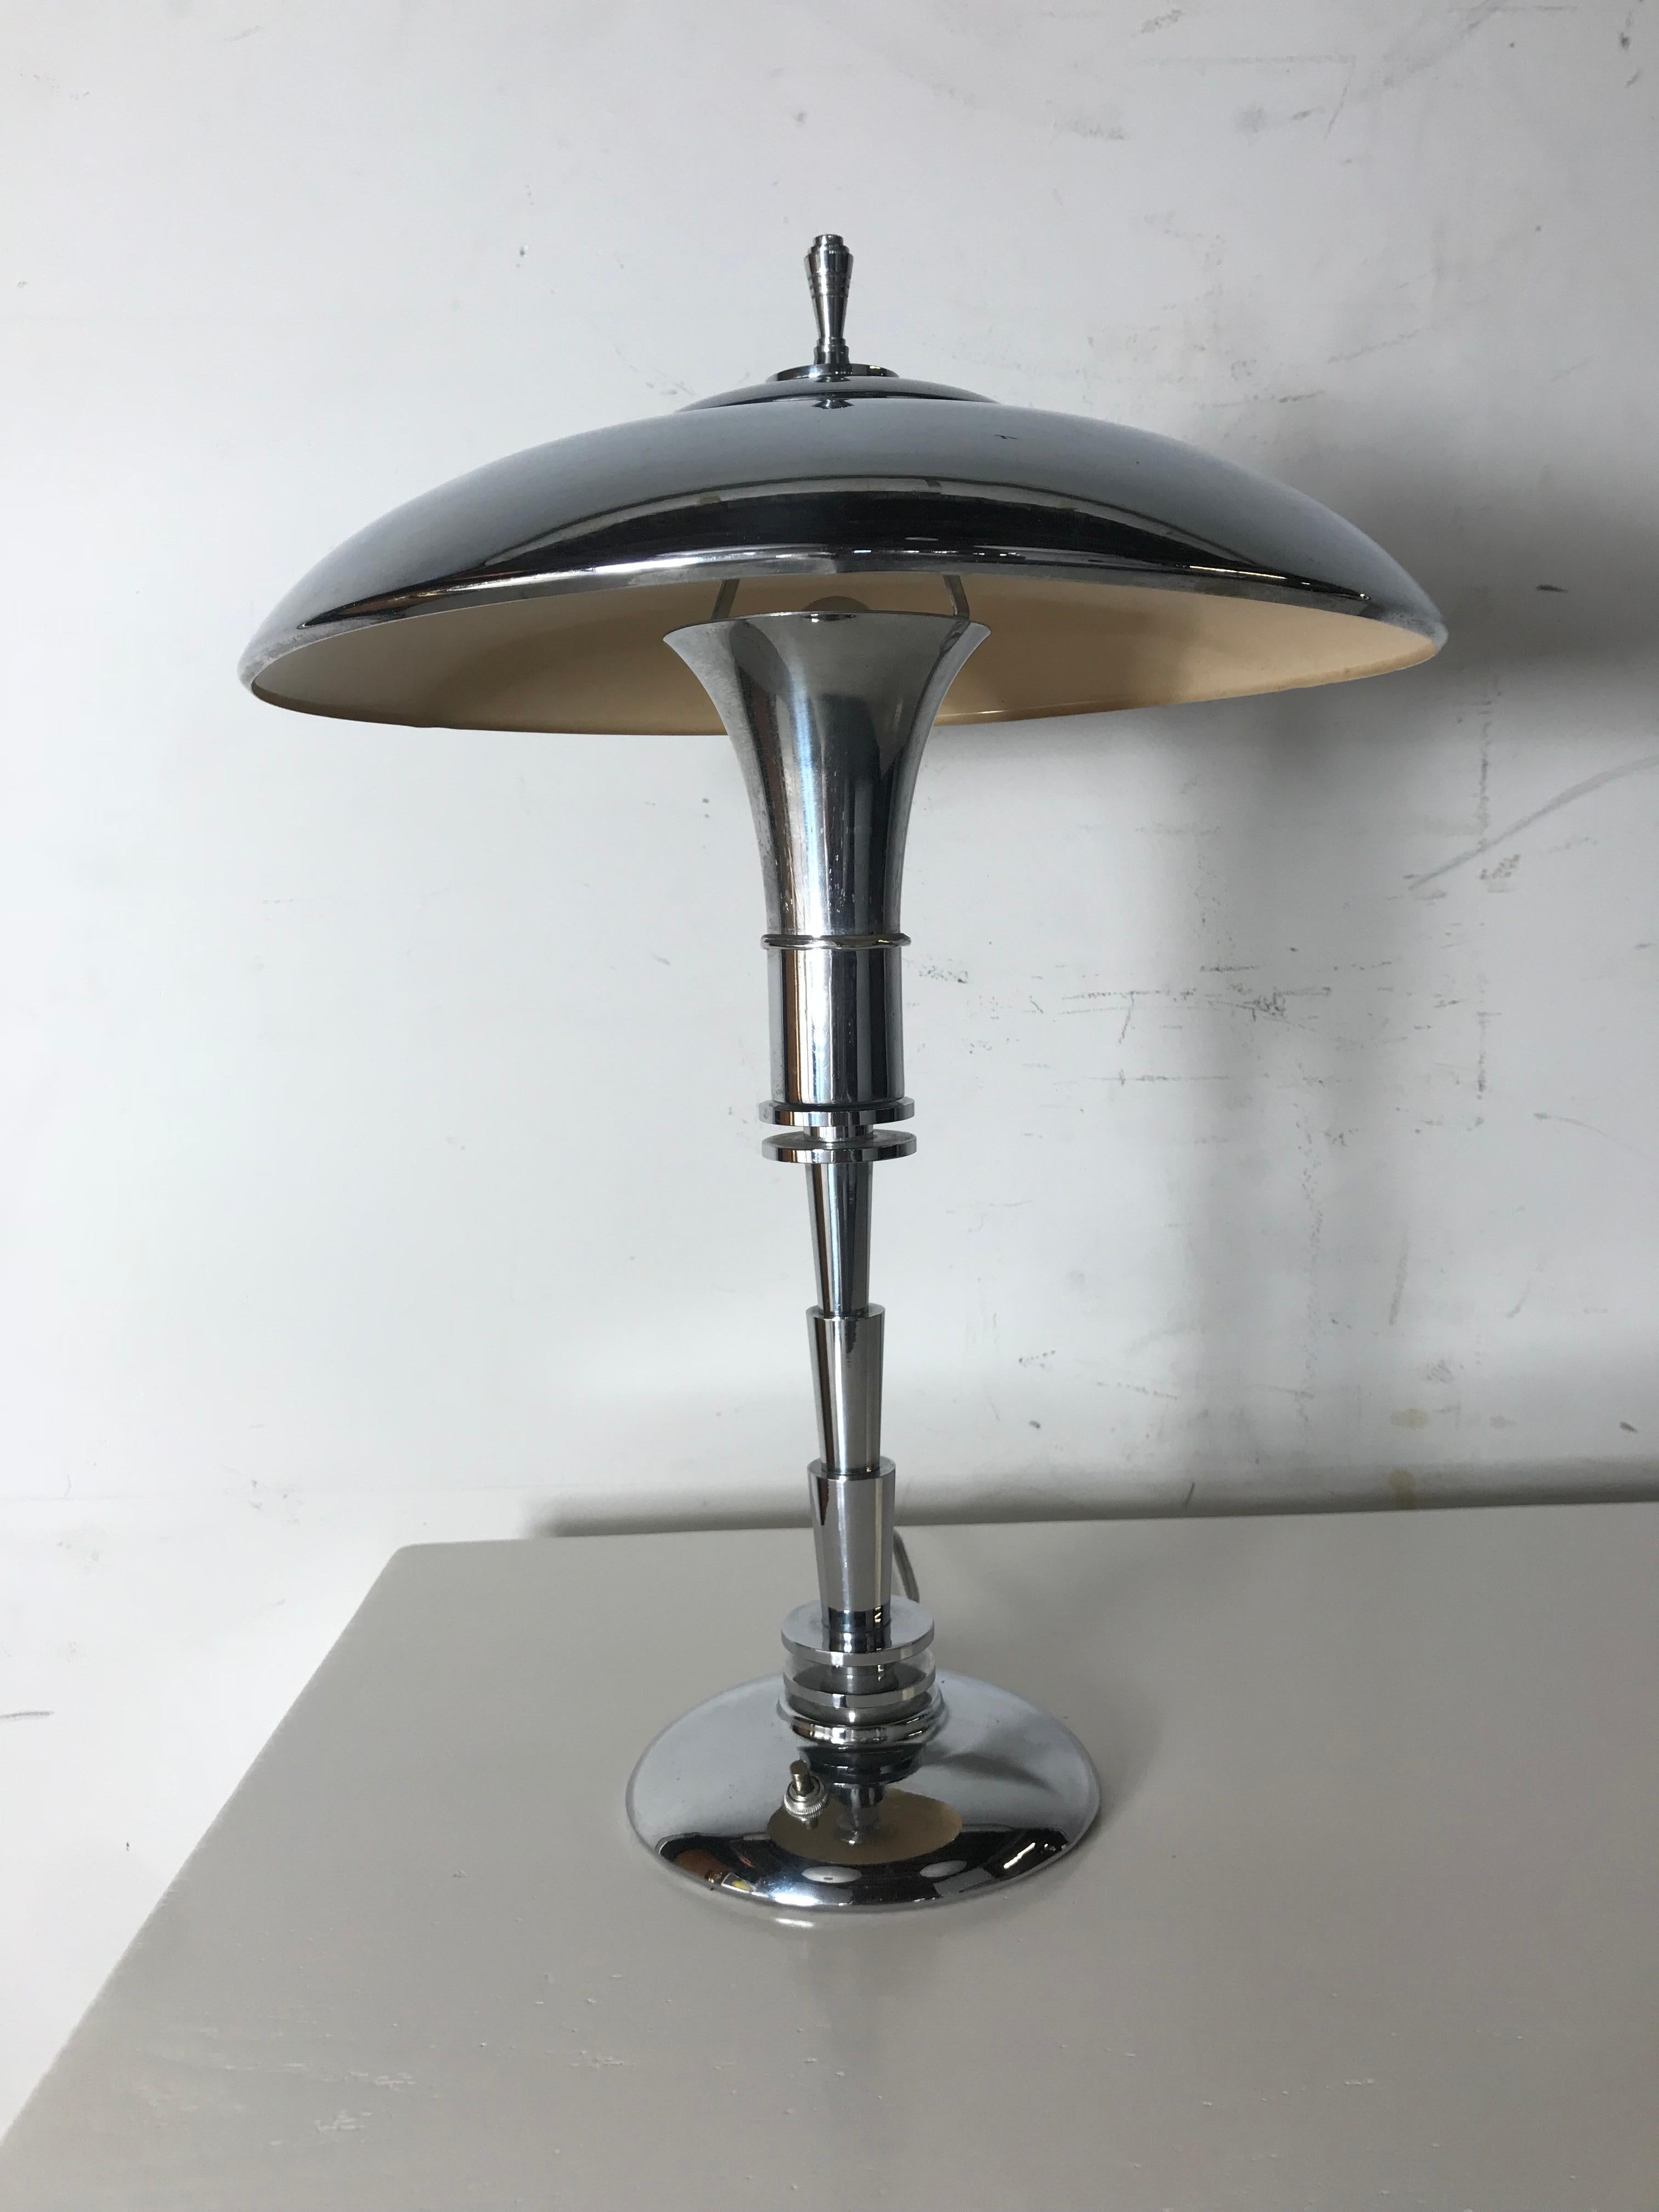 Art Deco Machine Age chrome desk by Faries Guardsman lamp attributed to KEM Weber, Classic elegant pure Art Deco design,, Wonderful polished chrome finish, retains original step chrome finial as well as original push button on/off switch, Signed